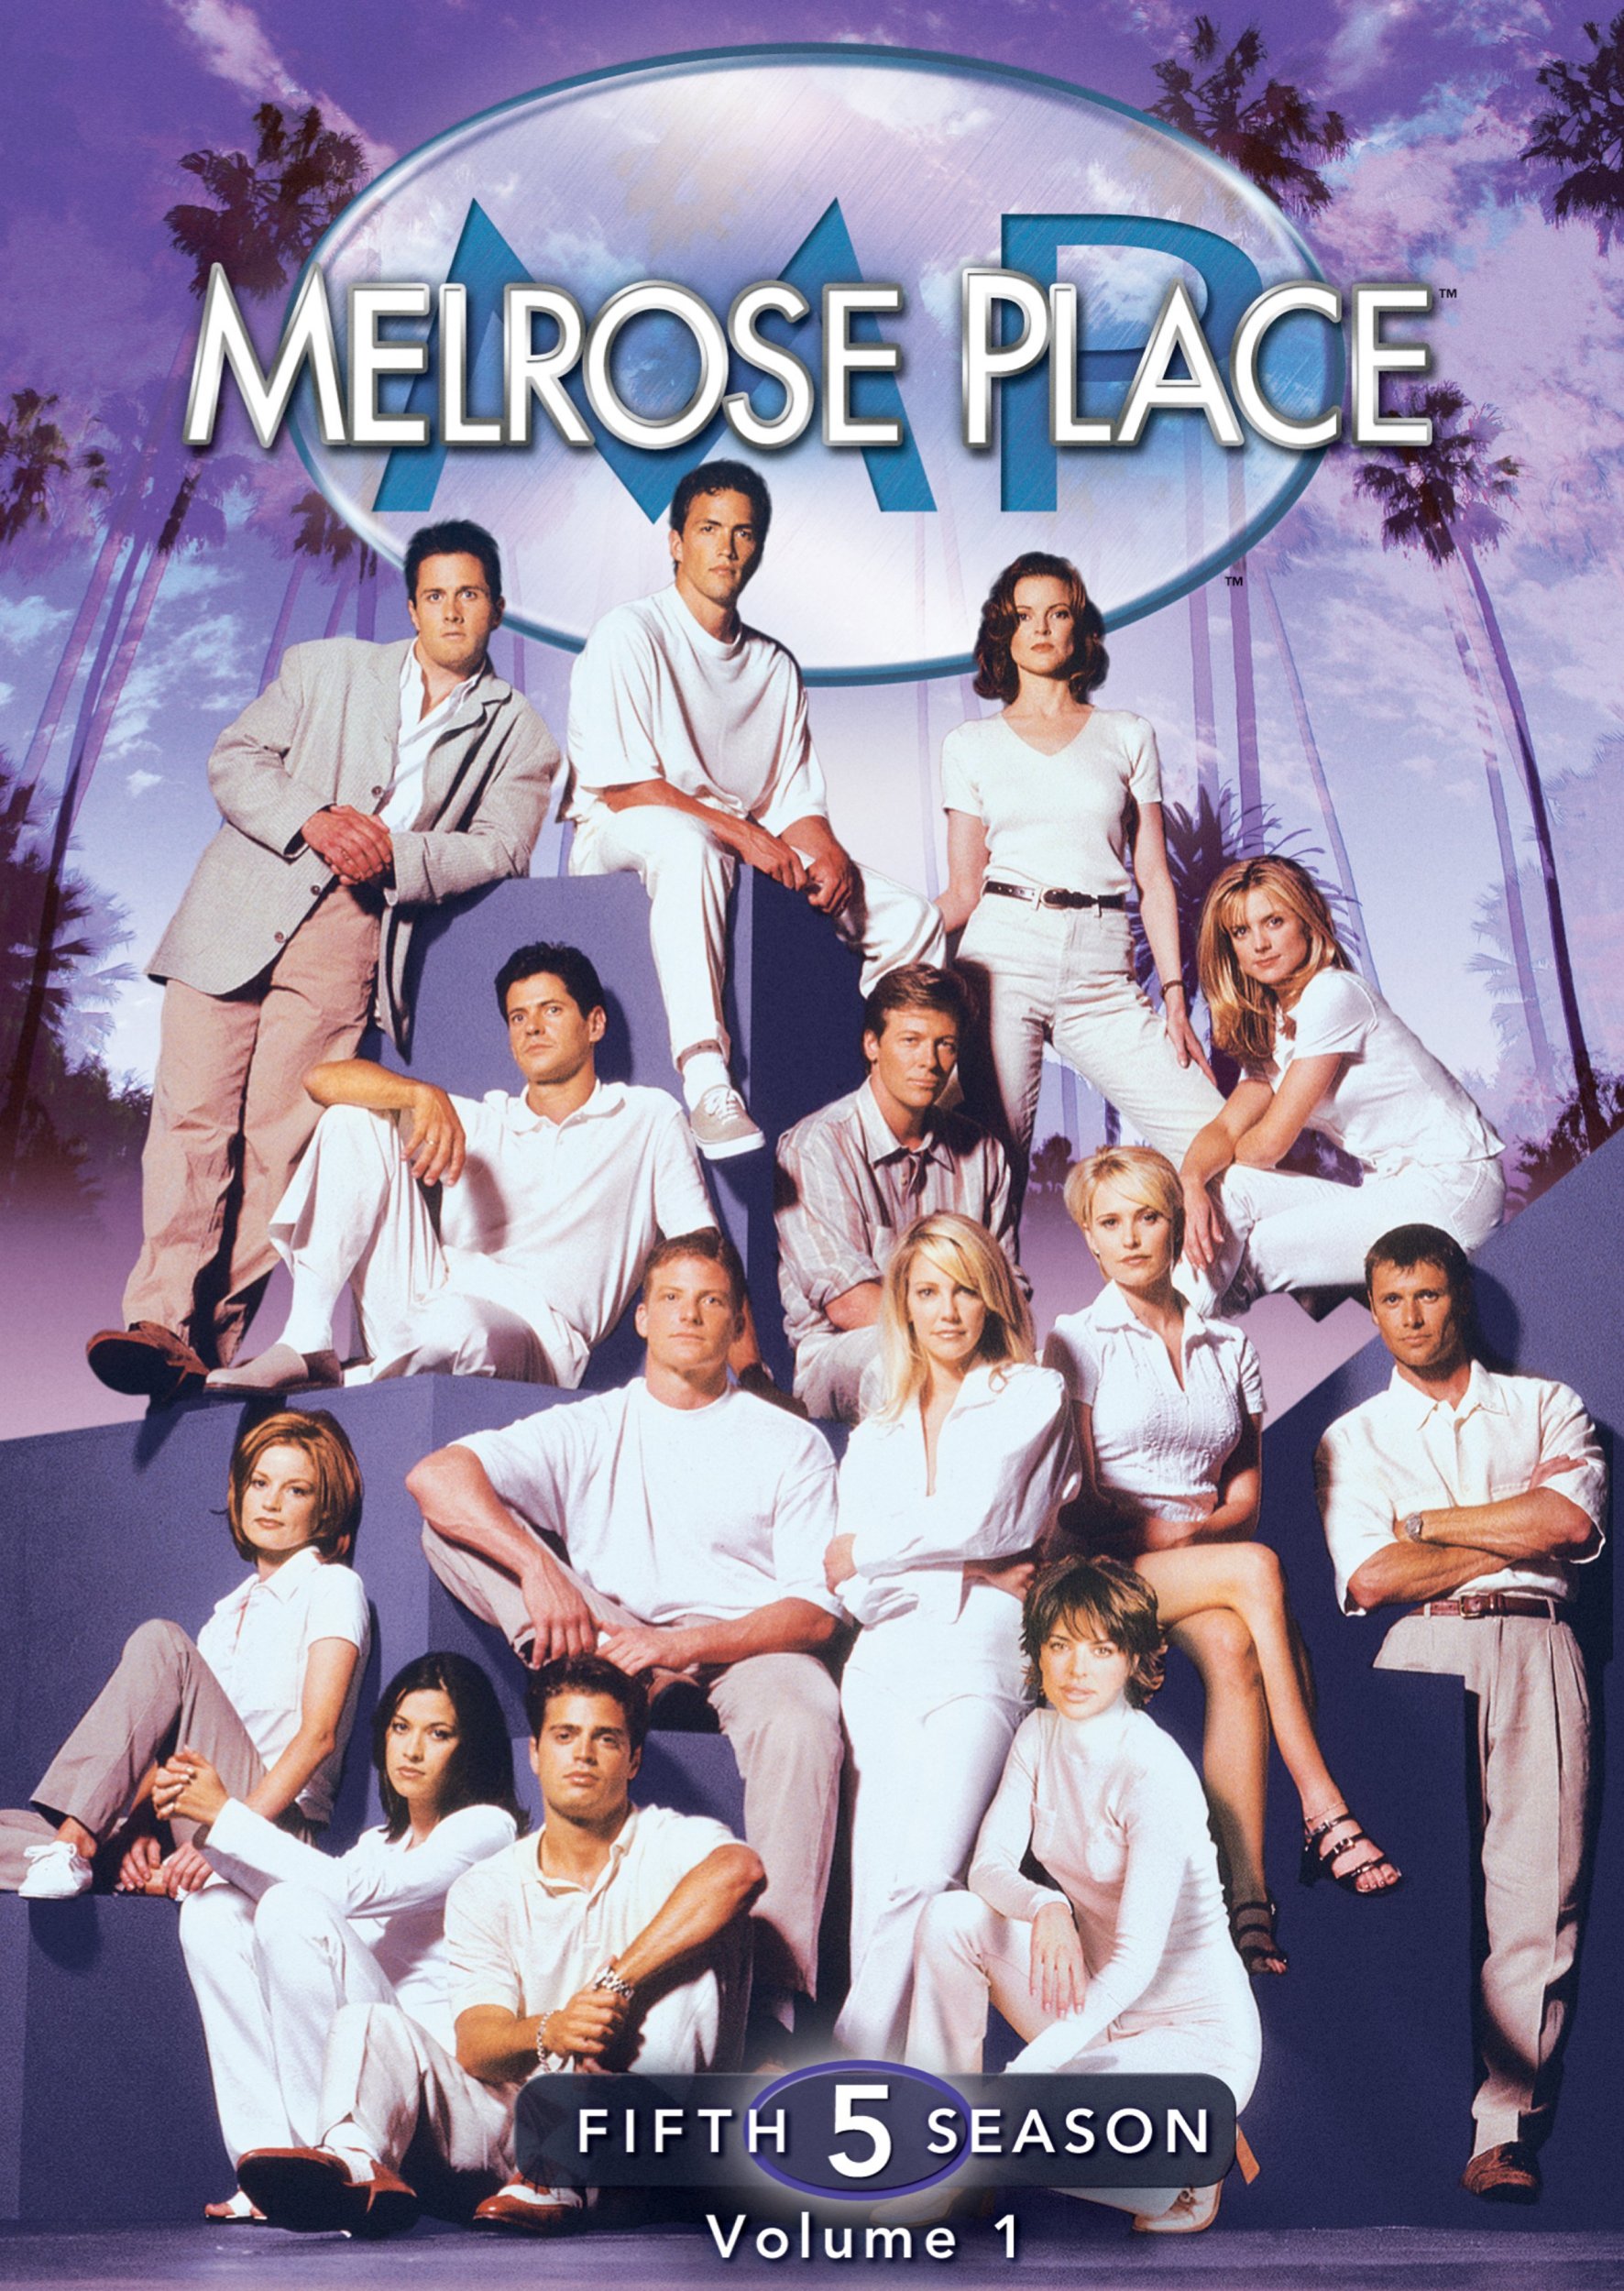 http://www.dvdsreleasedates.com/covers/melrose-place-the-fifth-season,-vol.-1-dvd-cover-44.jpg